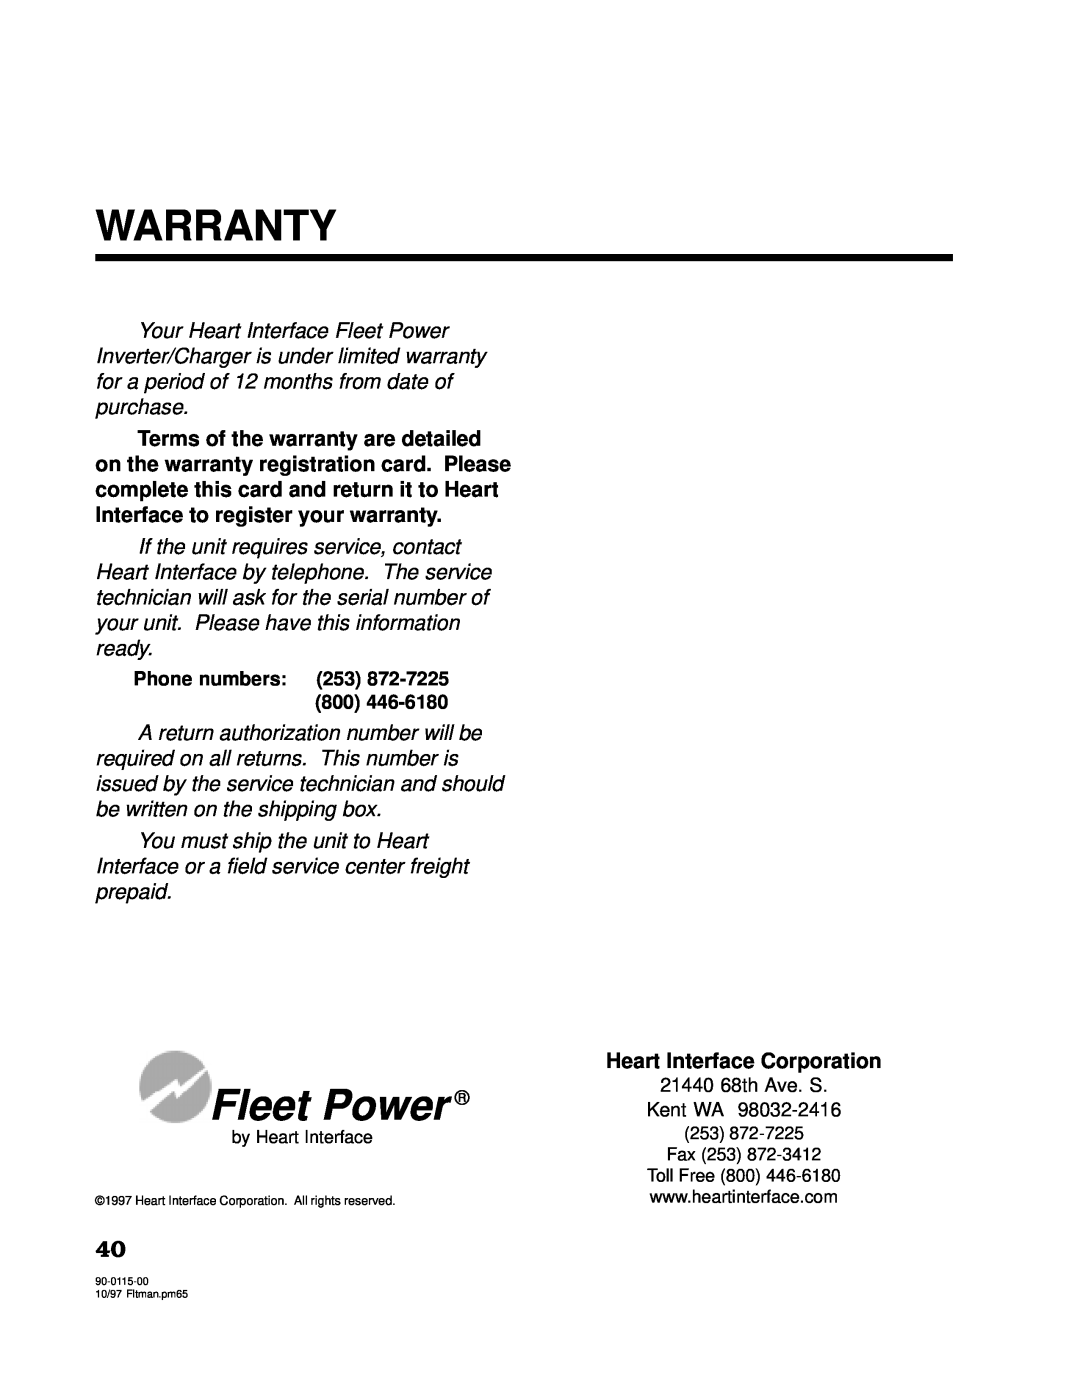 Xantrex Technology 2500, 2000 owner manual Warranty, You must ship the unit to Heart, Fleet Power 